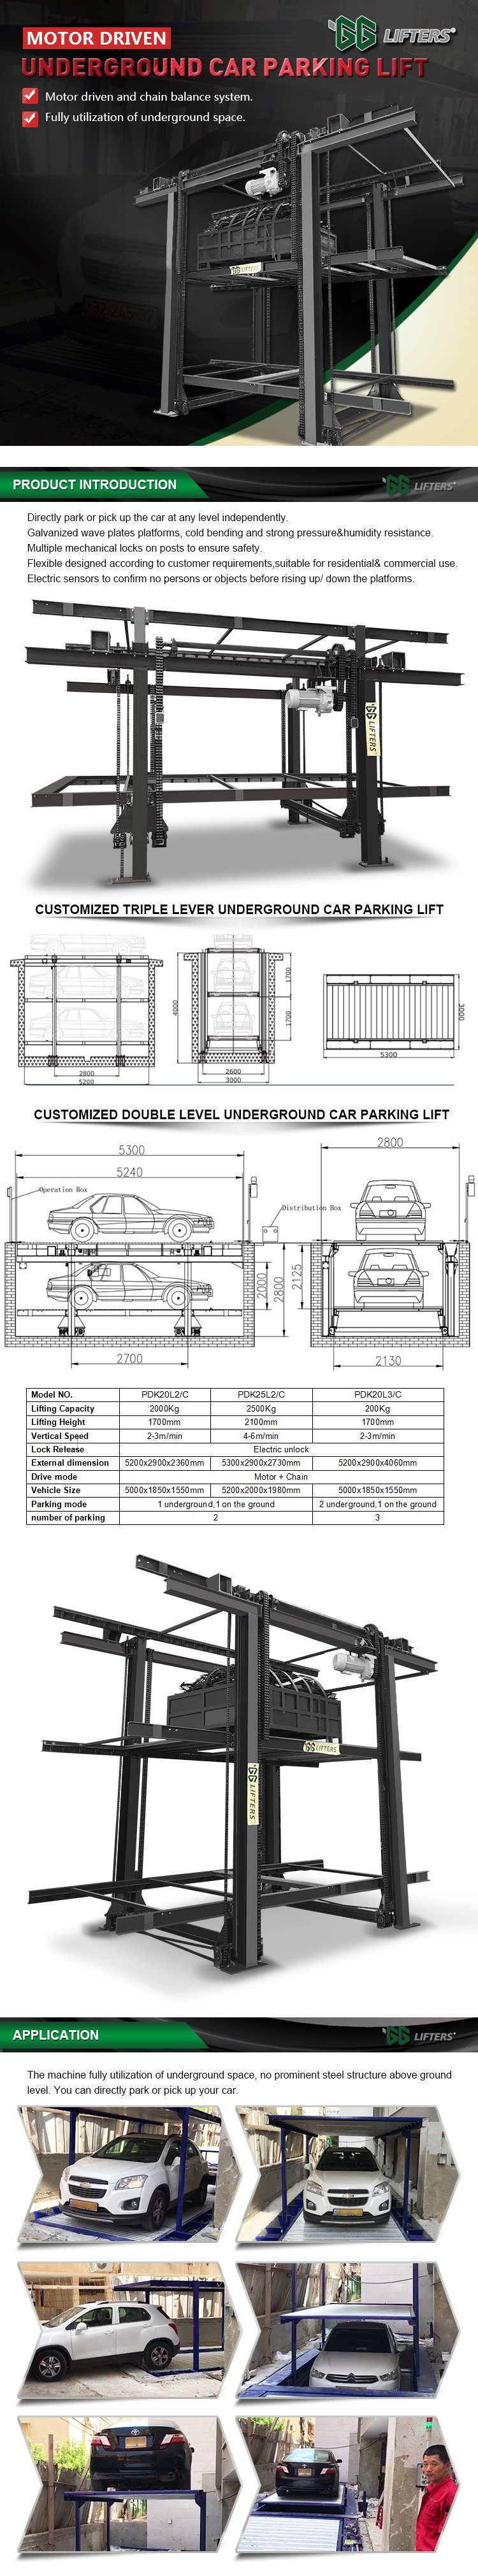 2 stage pit type car parking lift for home use